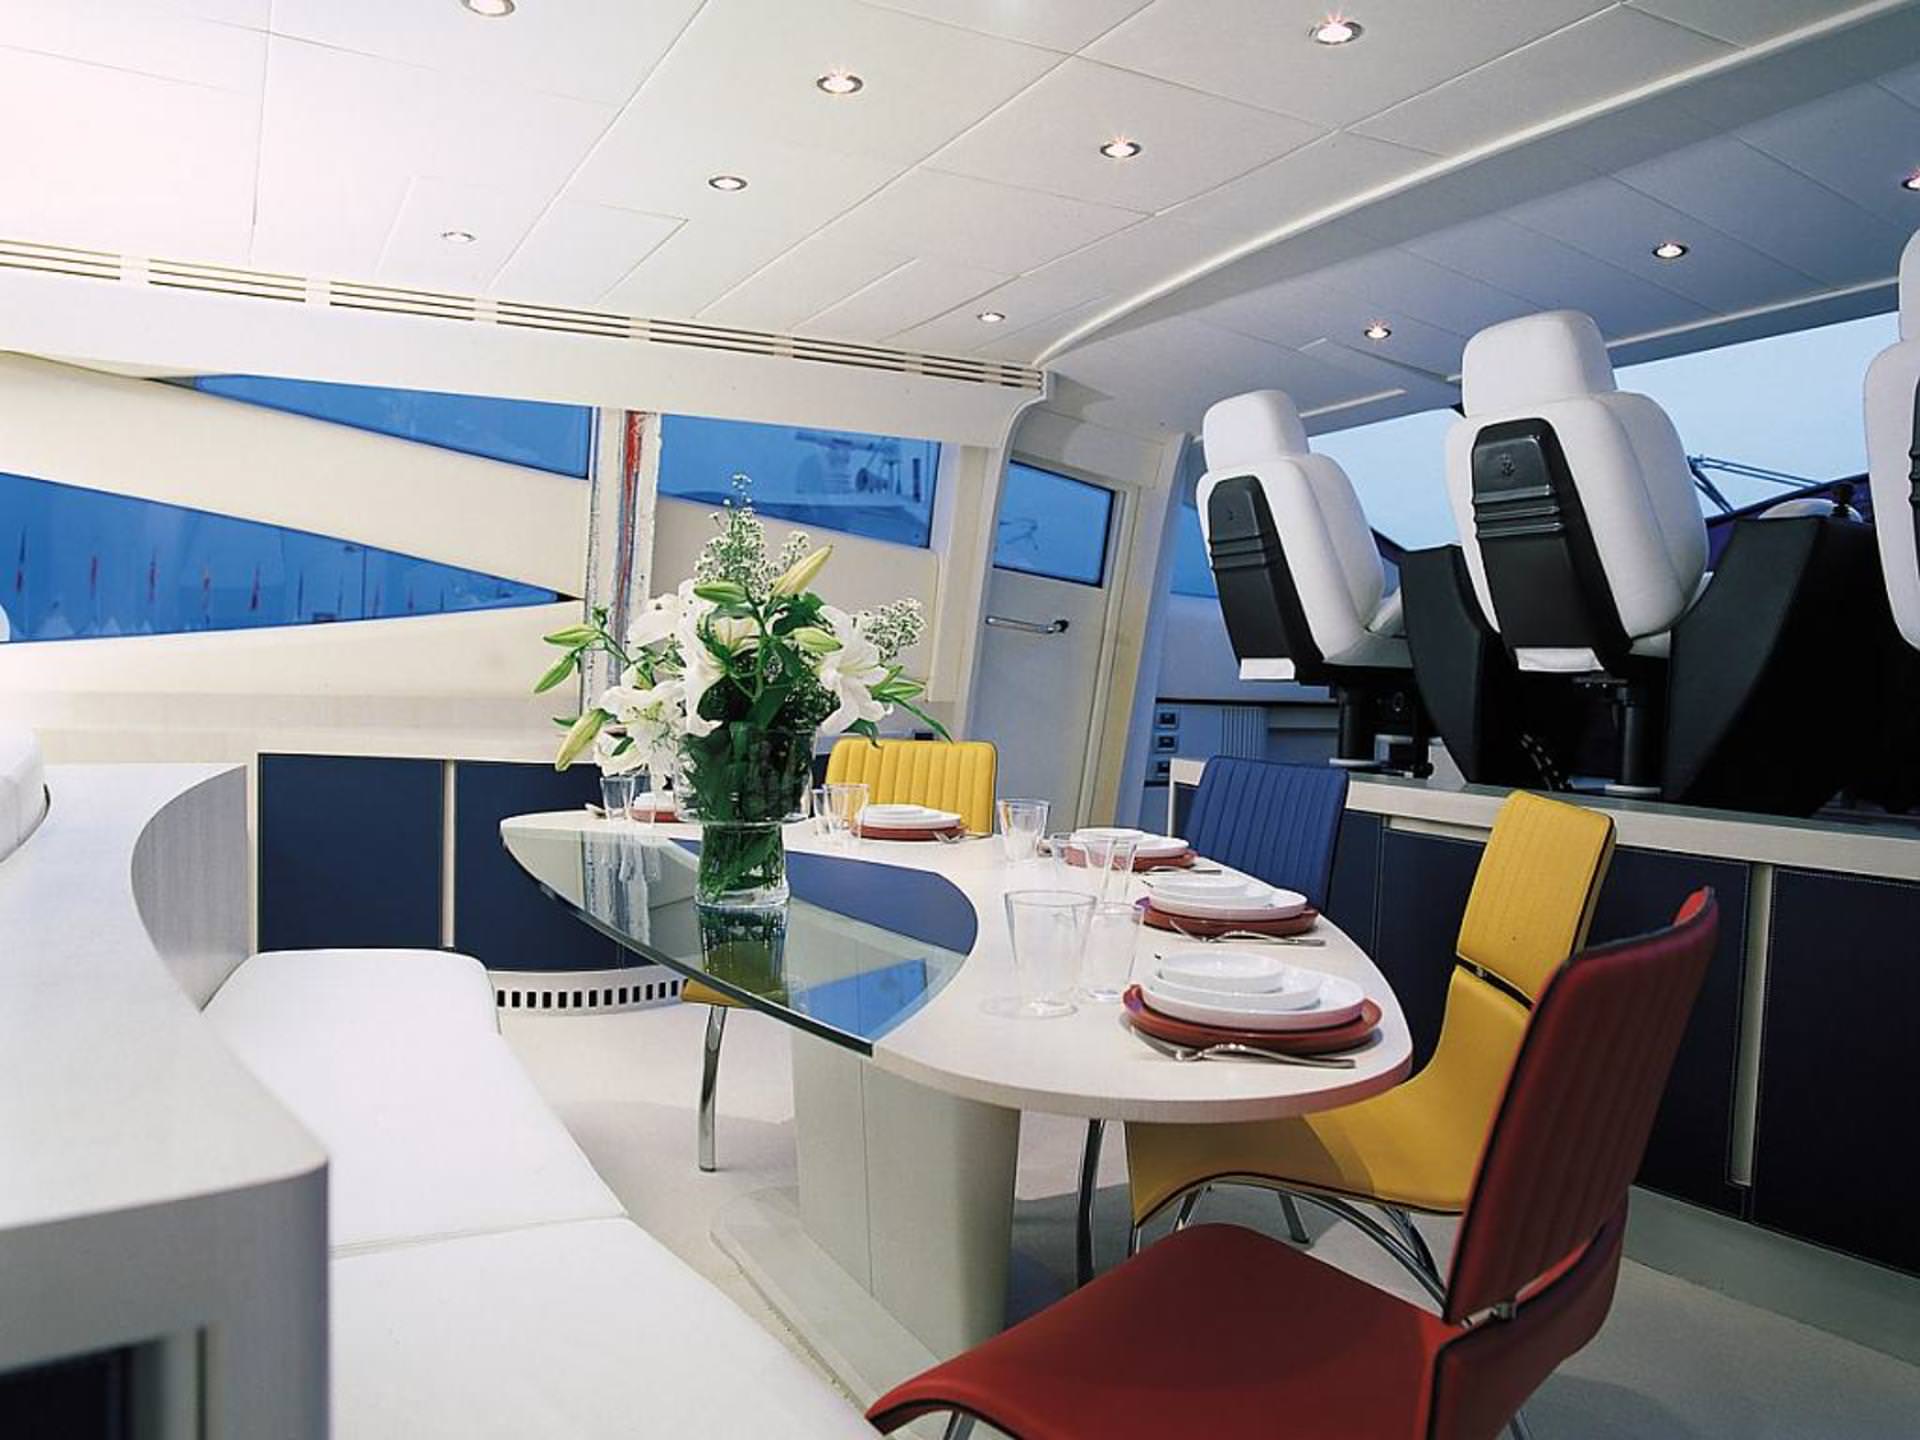 Mistral 55 - Exterior Living Spaces